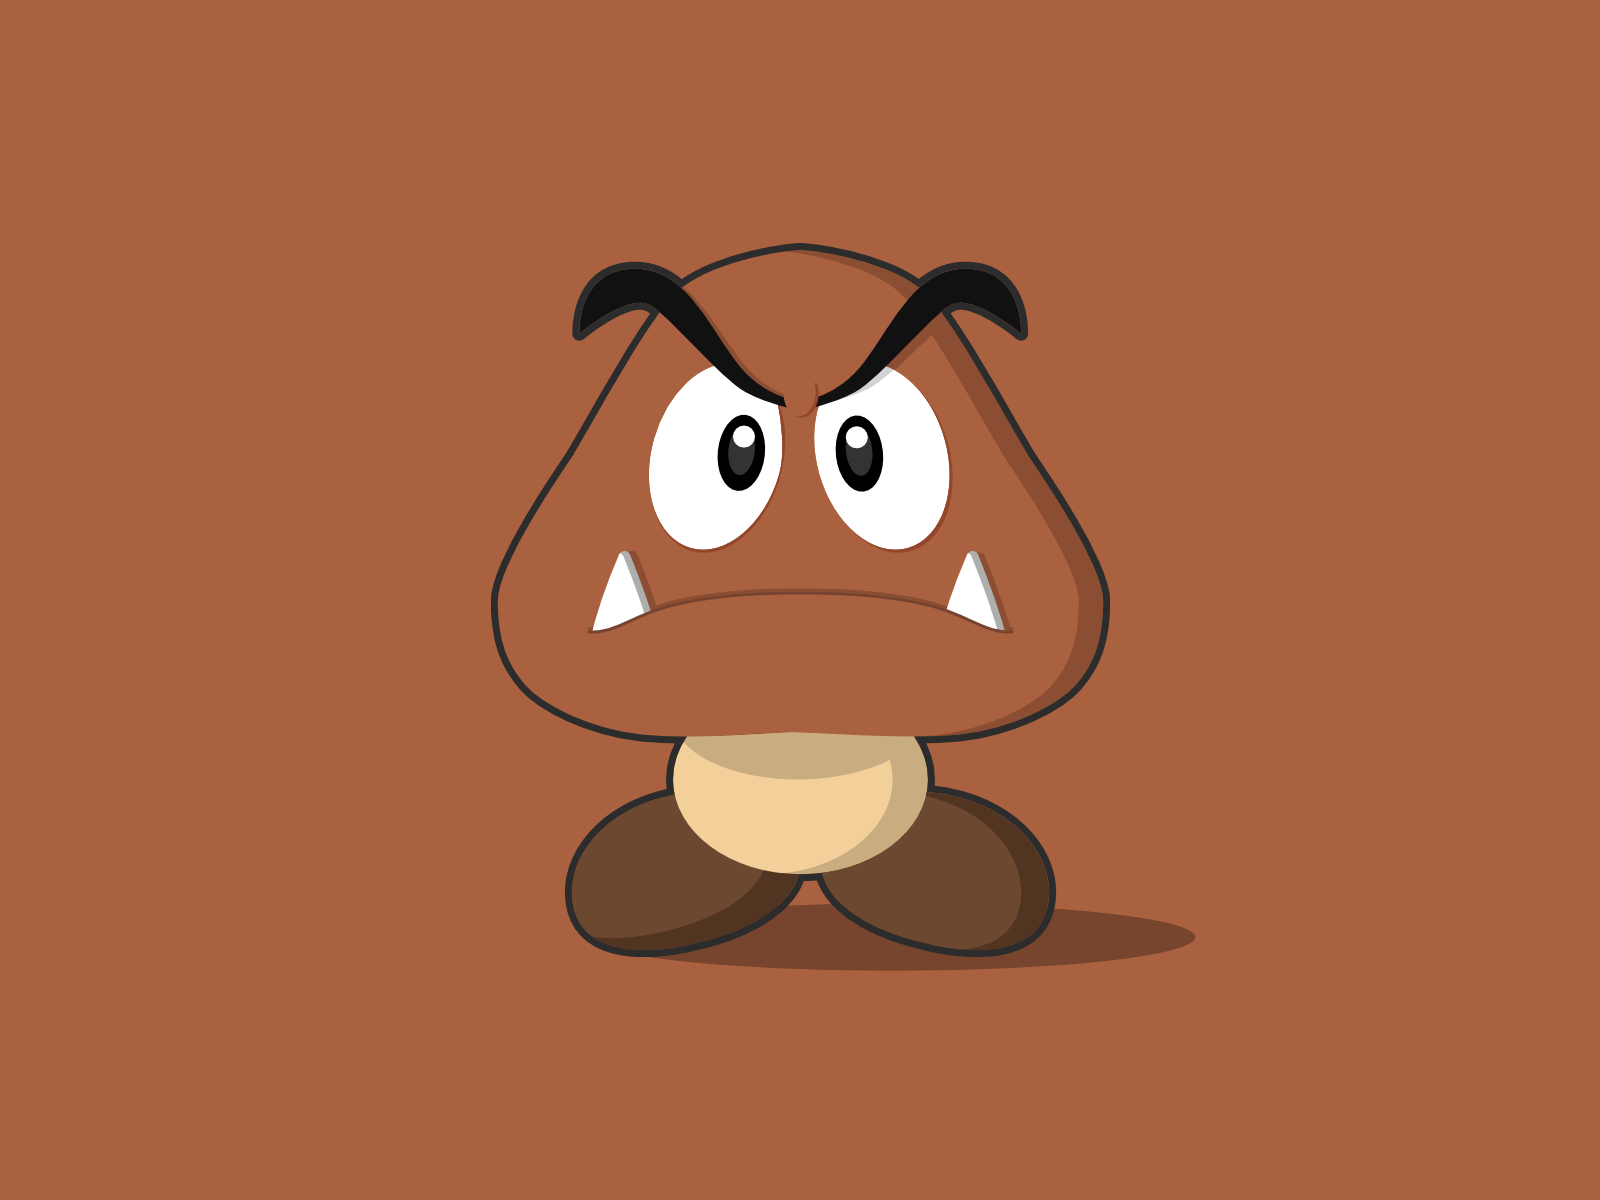 Goomba by Genewal Design on Dribbble